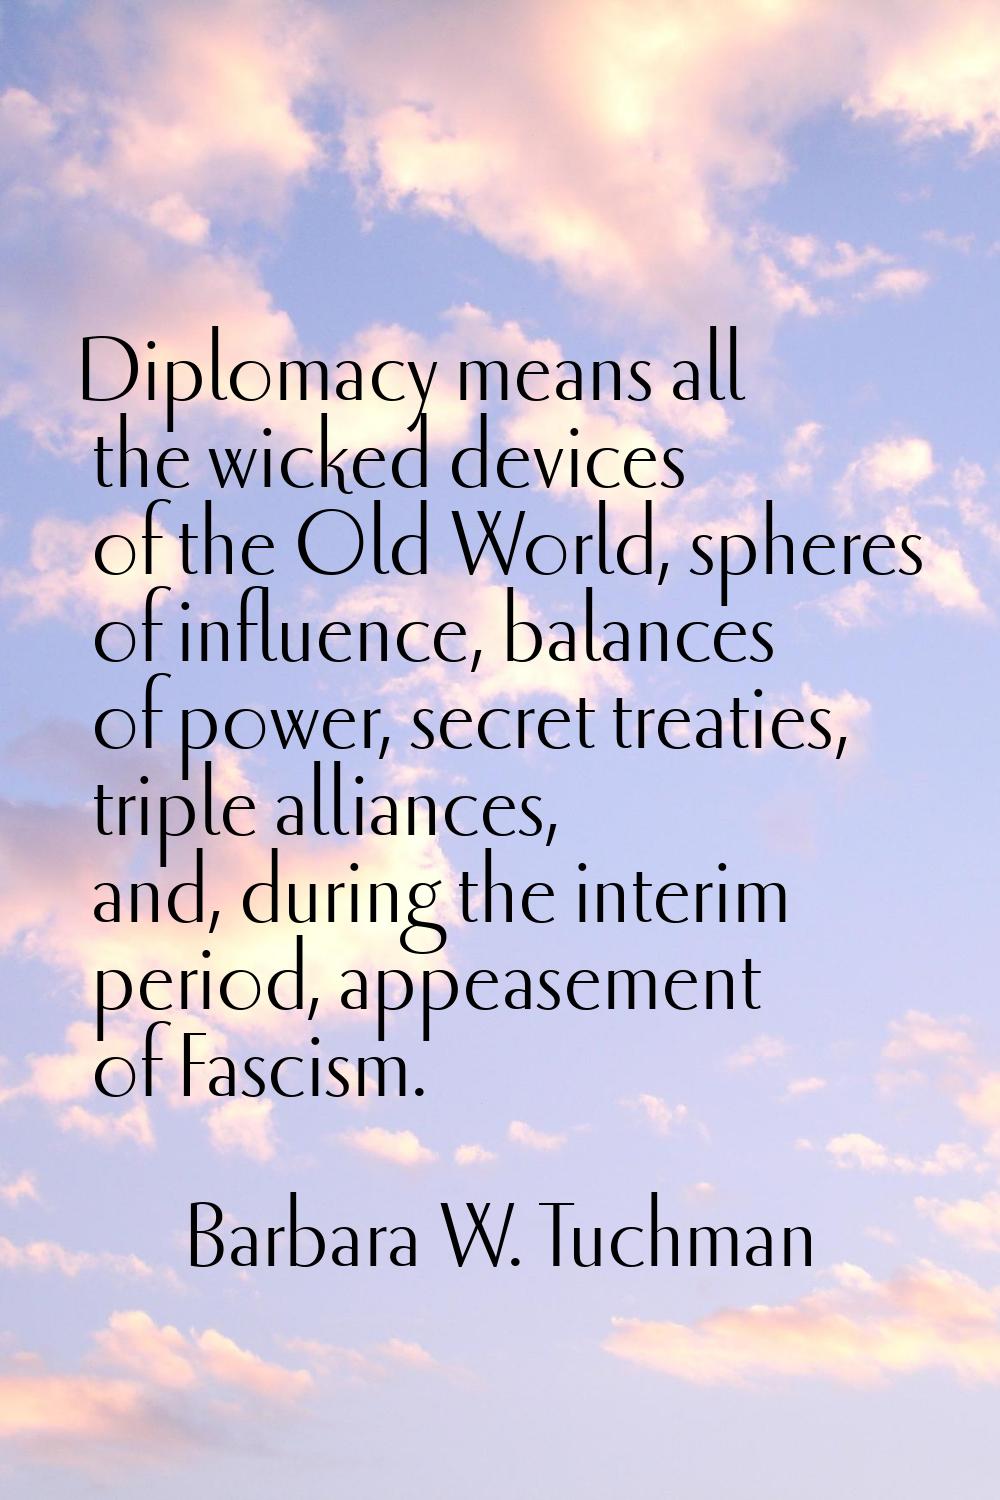 Diplomacy means all the wicked devices of the Old World, spheres of influence, balances of power, s